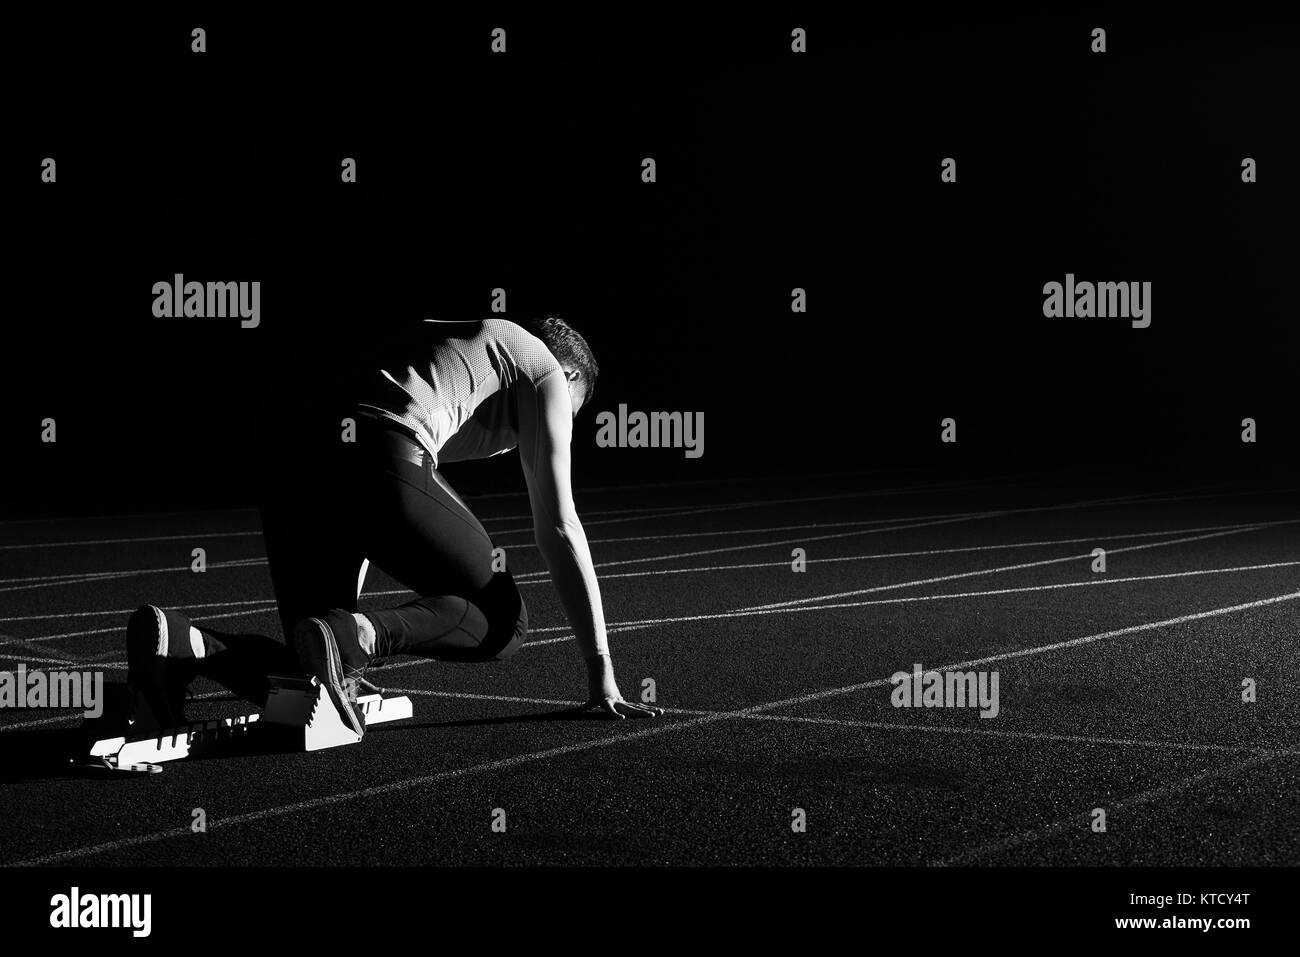 Running track Black and White Stock Photos & Images - Alamy